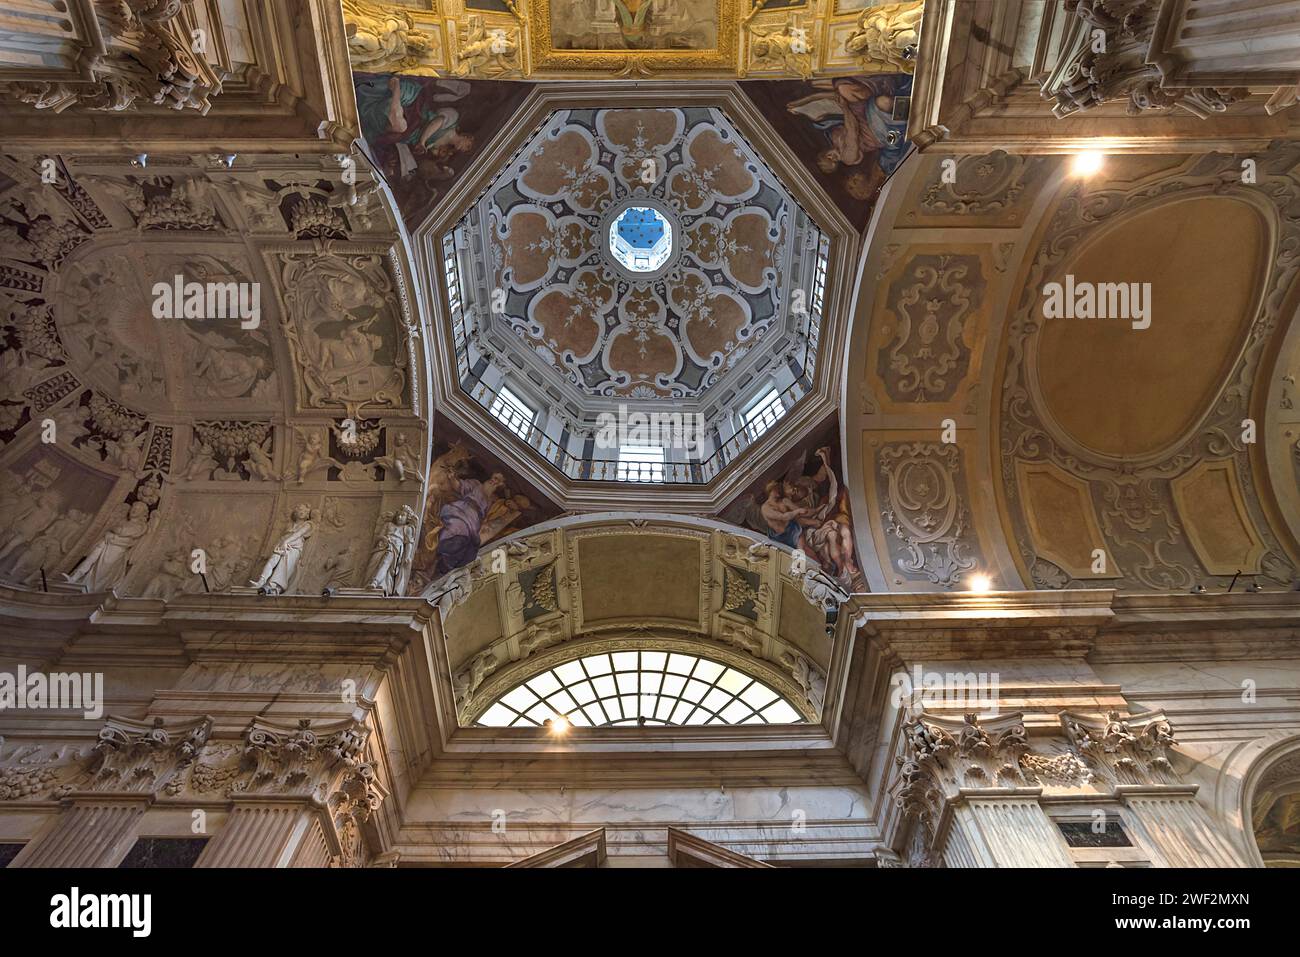 Dome of the church of San Pietro ion Banchi, consecrated in 1585, Piazza Banchi Genoa, Italy Stock Photo